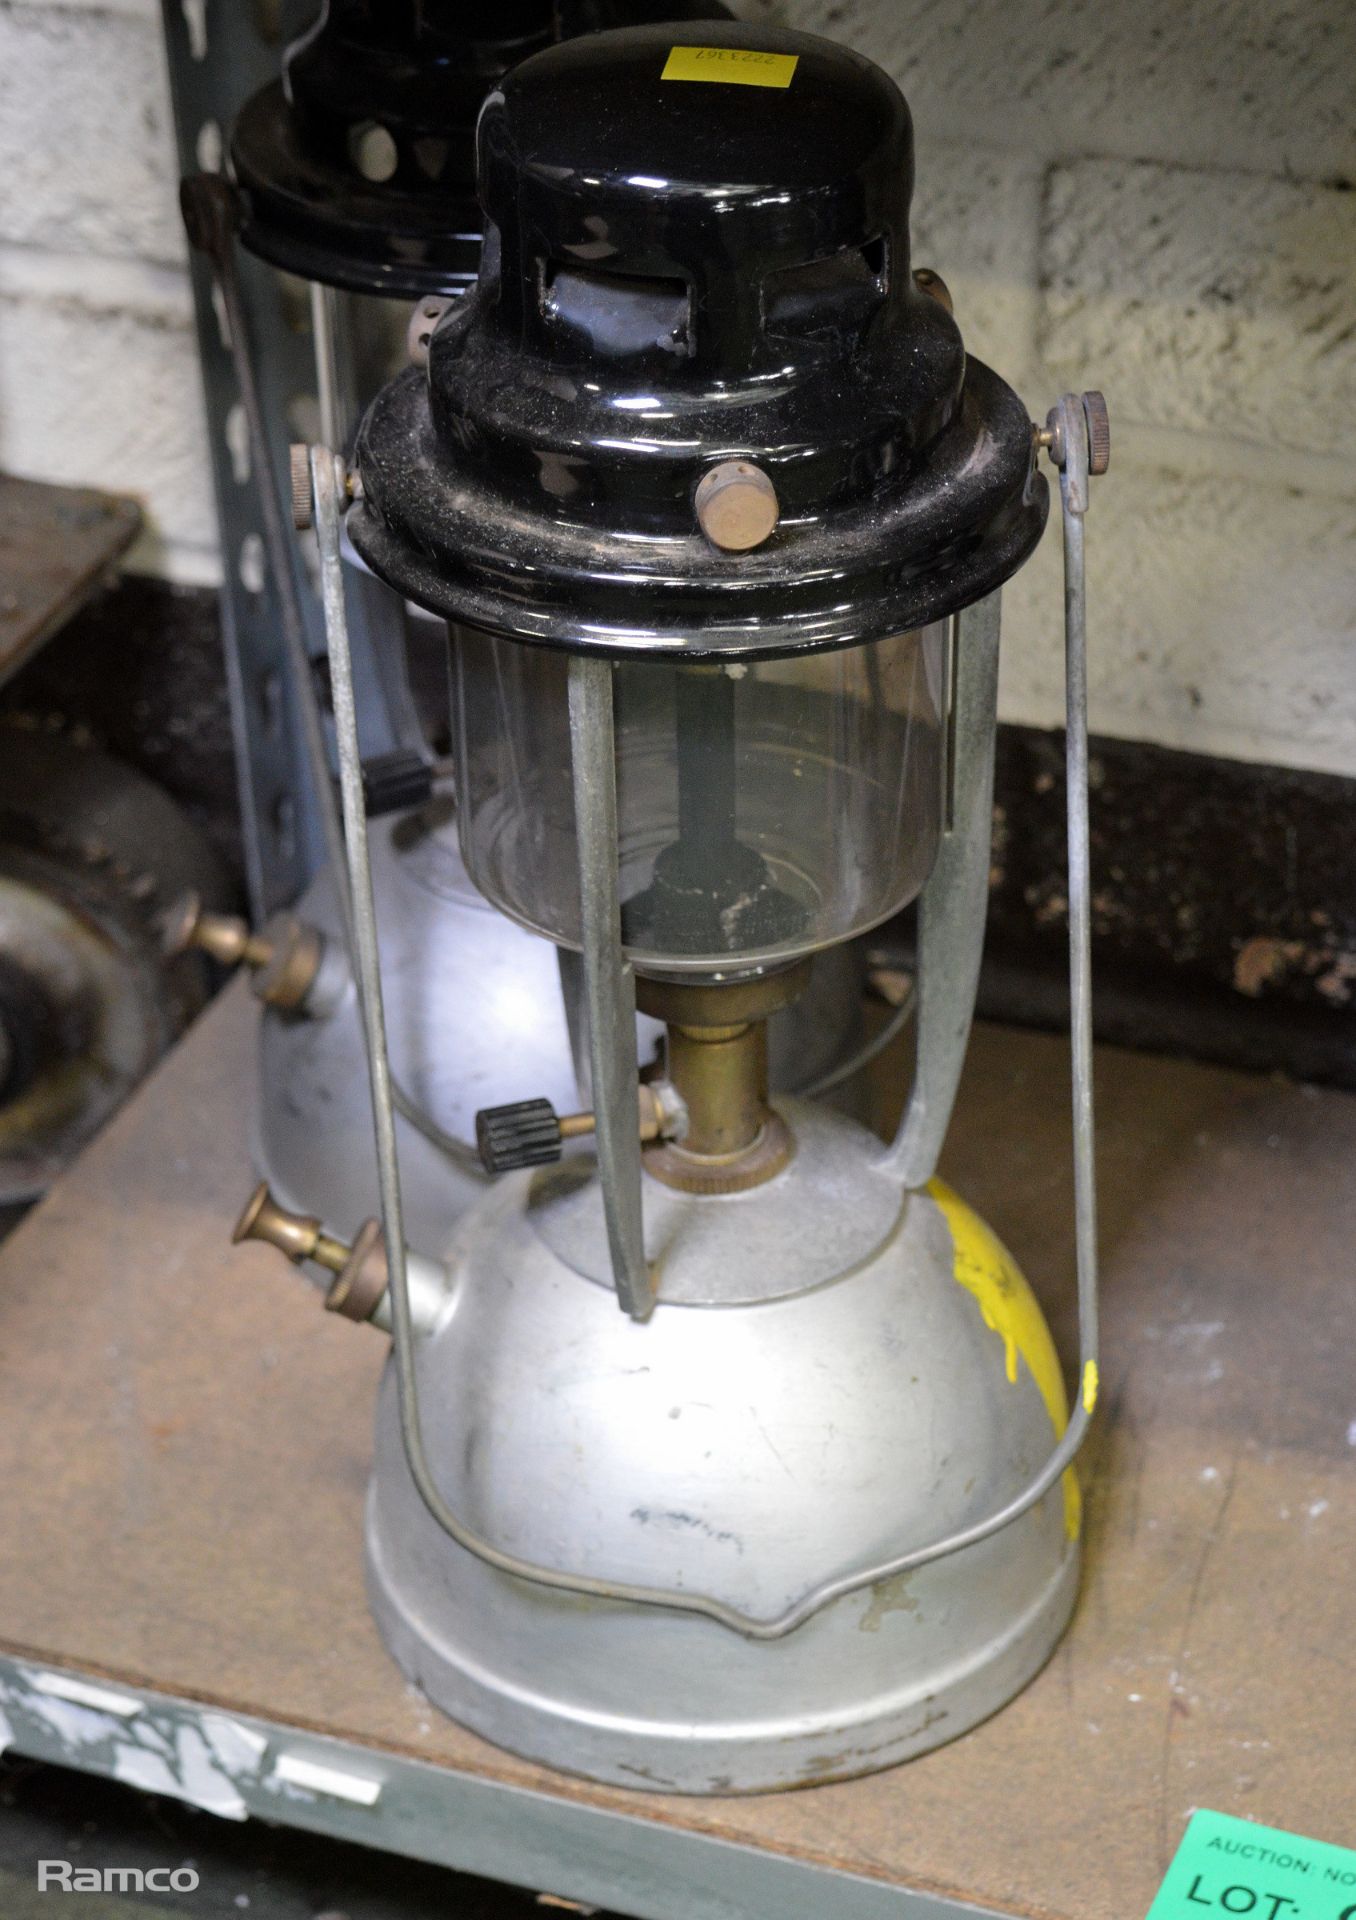 5x Tilley lamps - see pictures for condition - Image 3 of 3